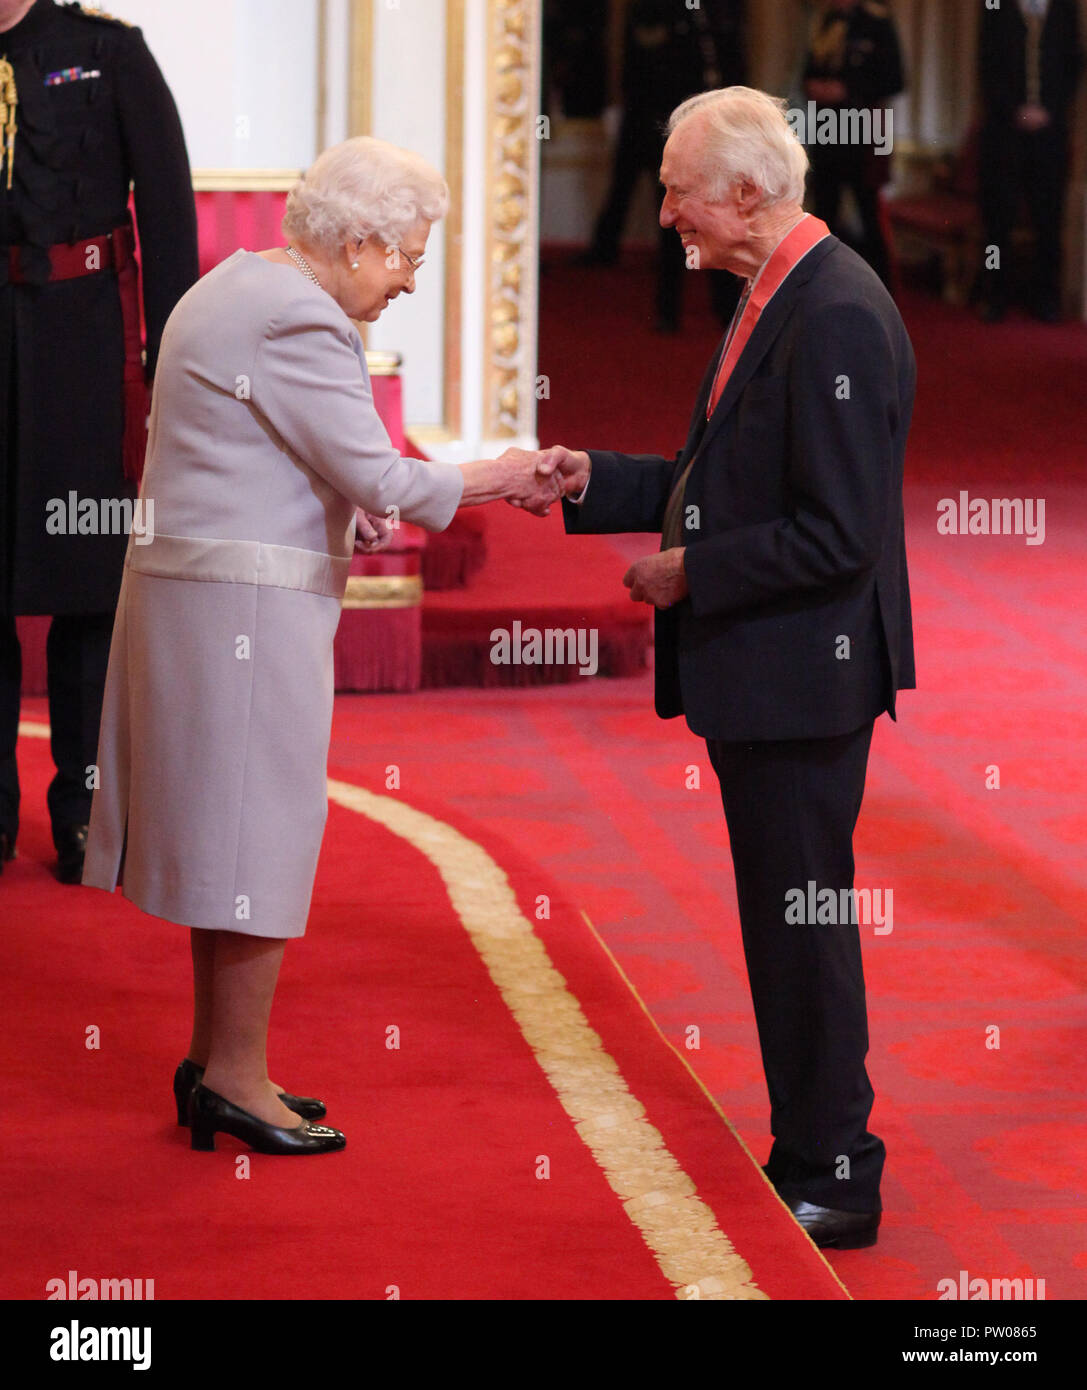 Mr. Bamber Gascoigne from Richmond is made a CBE (Commander of the Order of the British Empire) by Queen Elizabeth II, during an Investiture ceremony at Buckingham Palace, London. Stock Photo